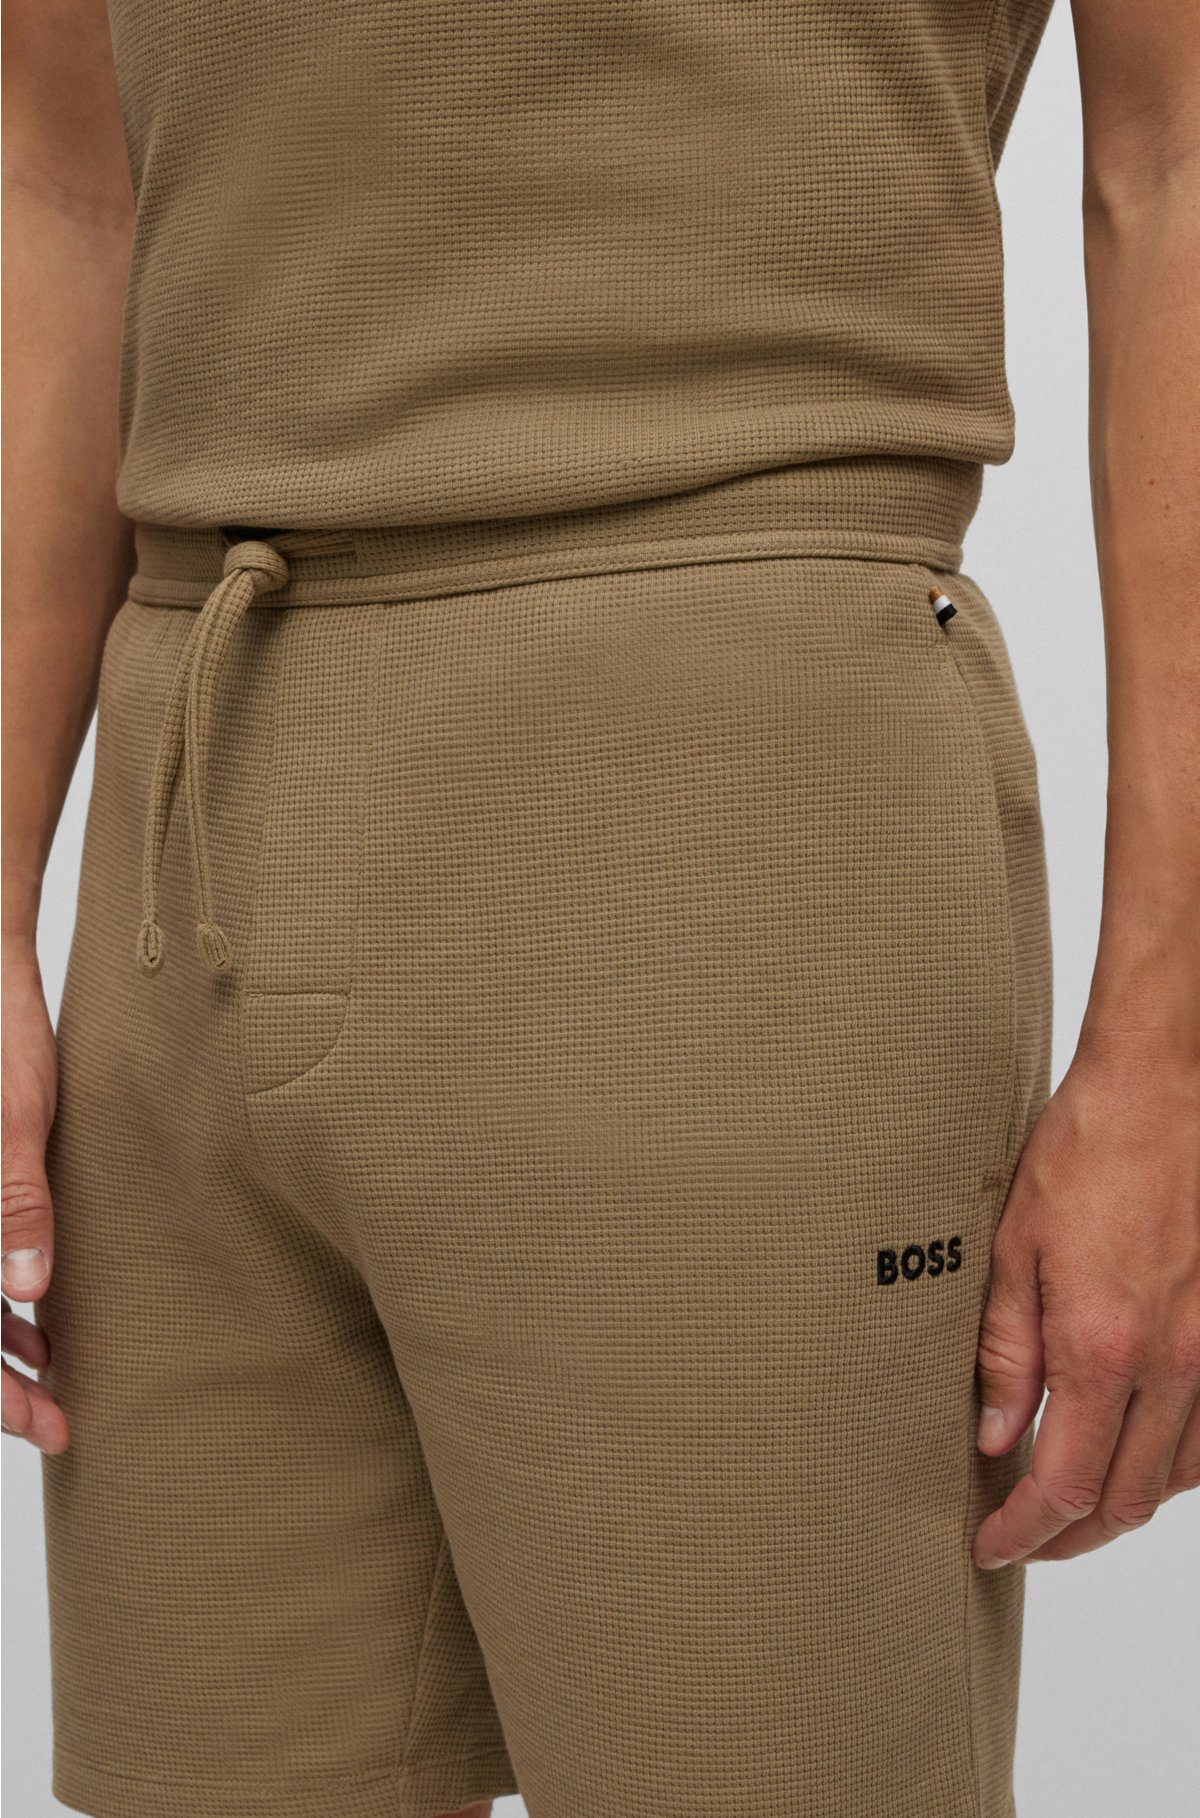 BOSS - Pajama shorts with logo embroidered